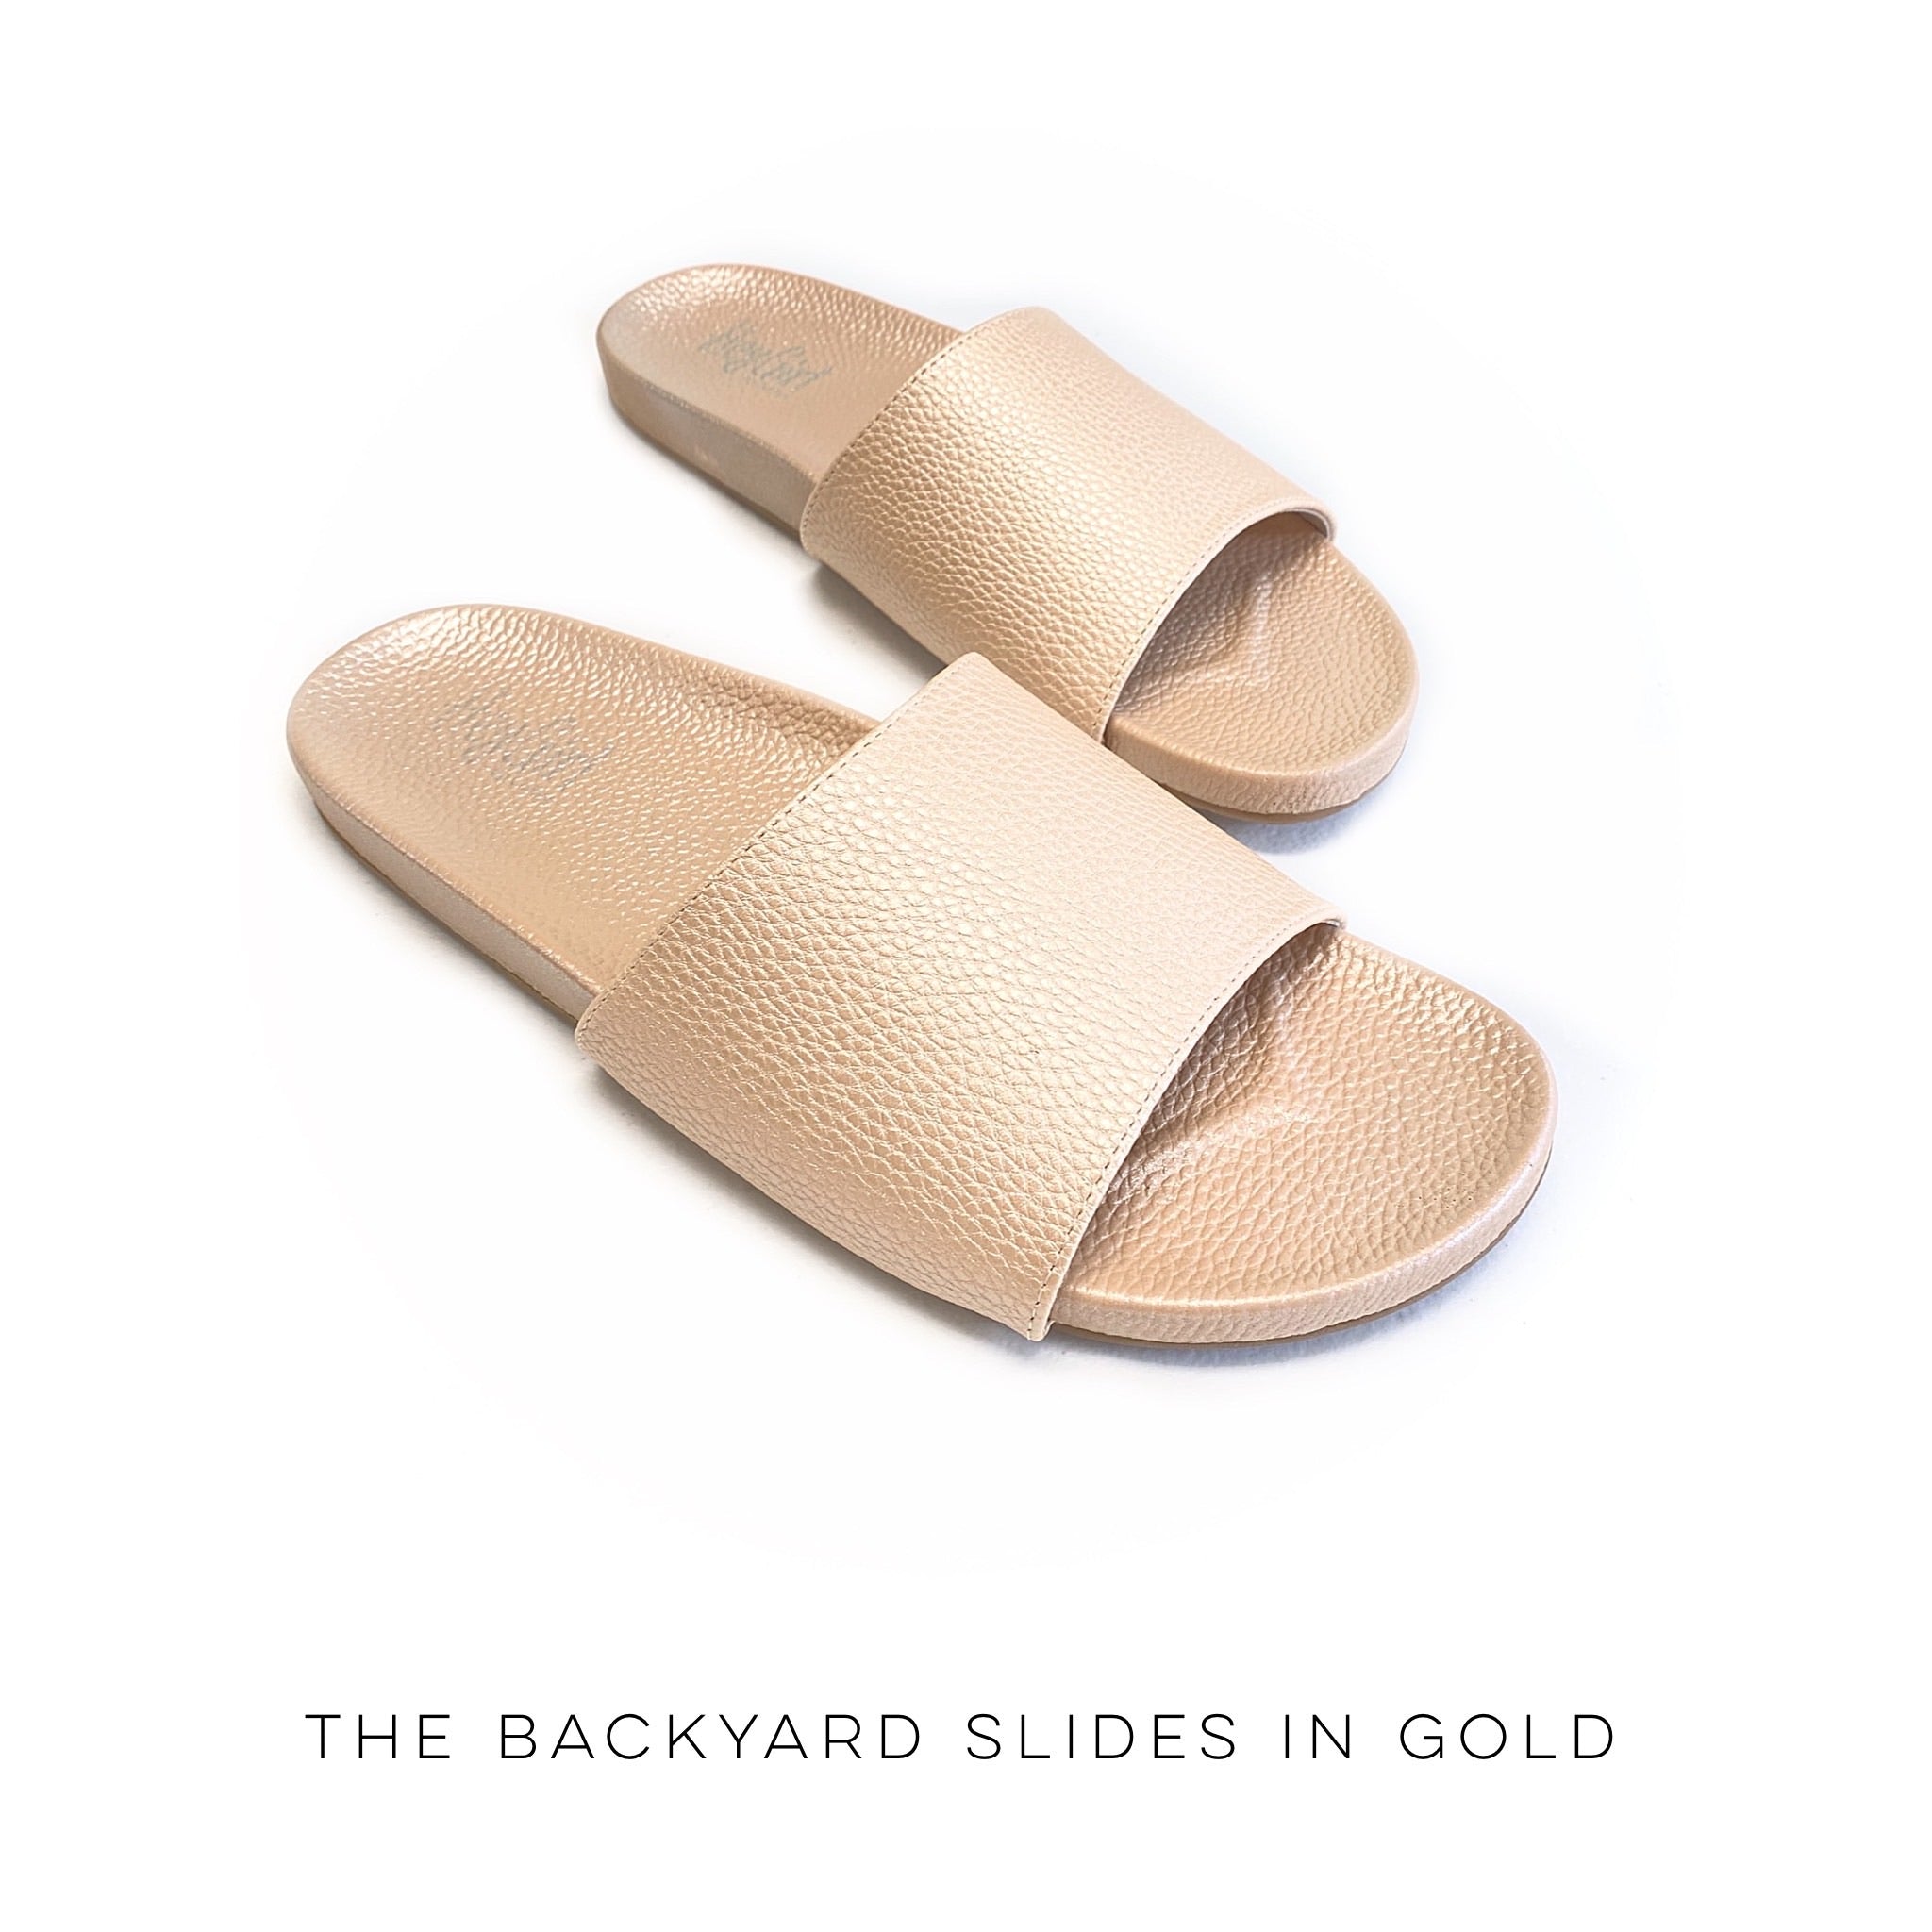 The Backyard Slides in Gold